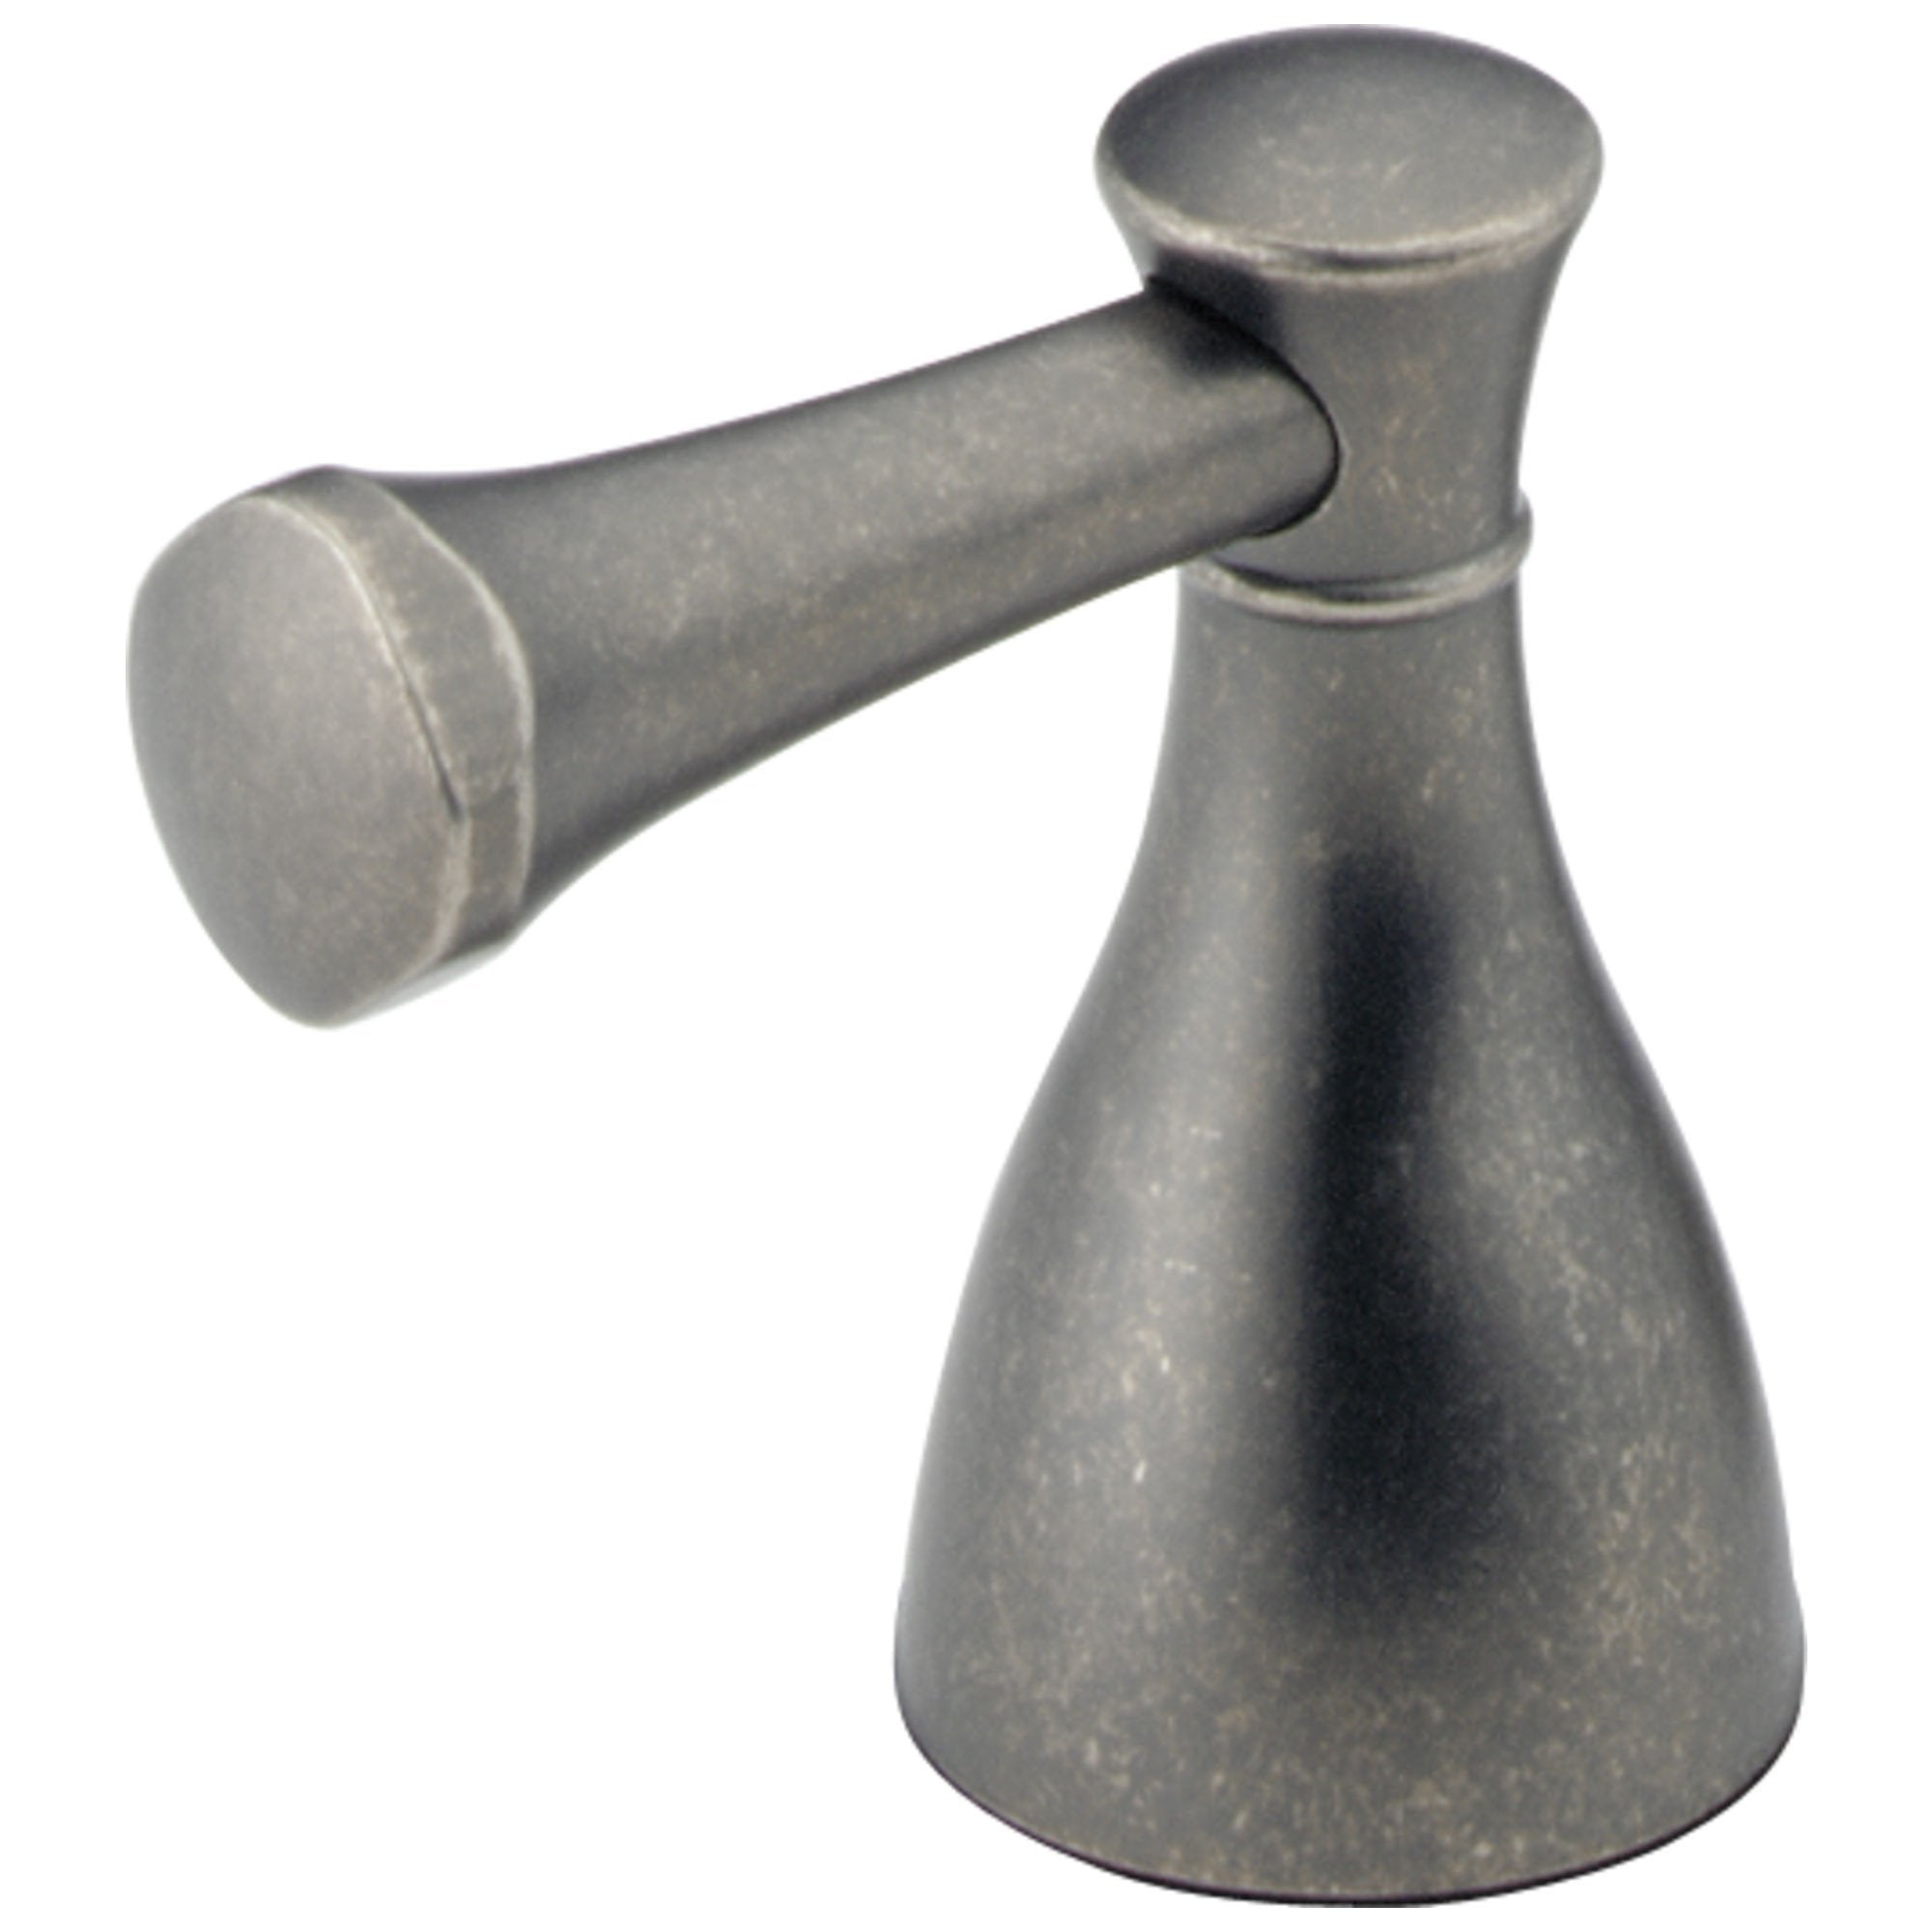 Delta Lockwood Collection Aged Pewter Finish Metal Lever Handles - Quantity 2 Included DH240PT